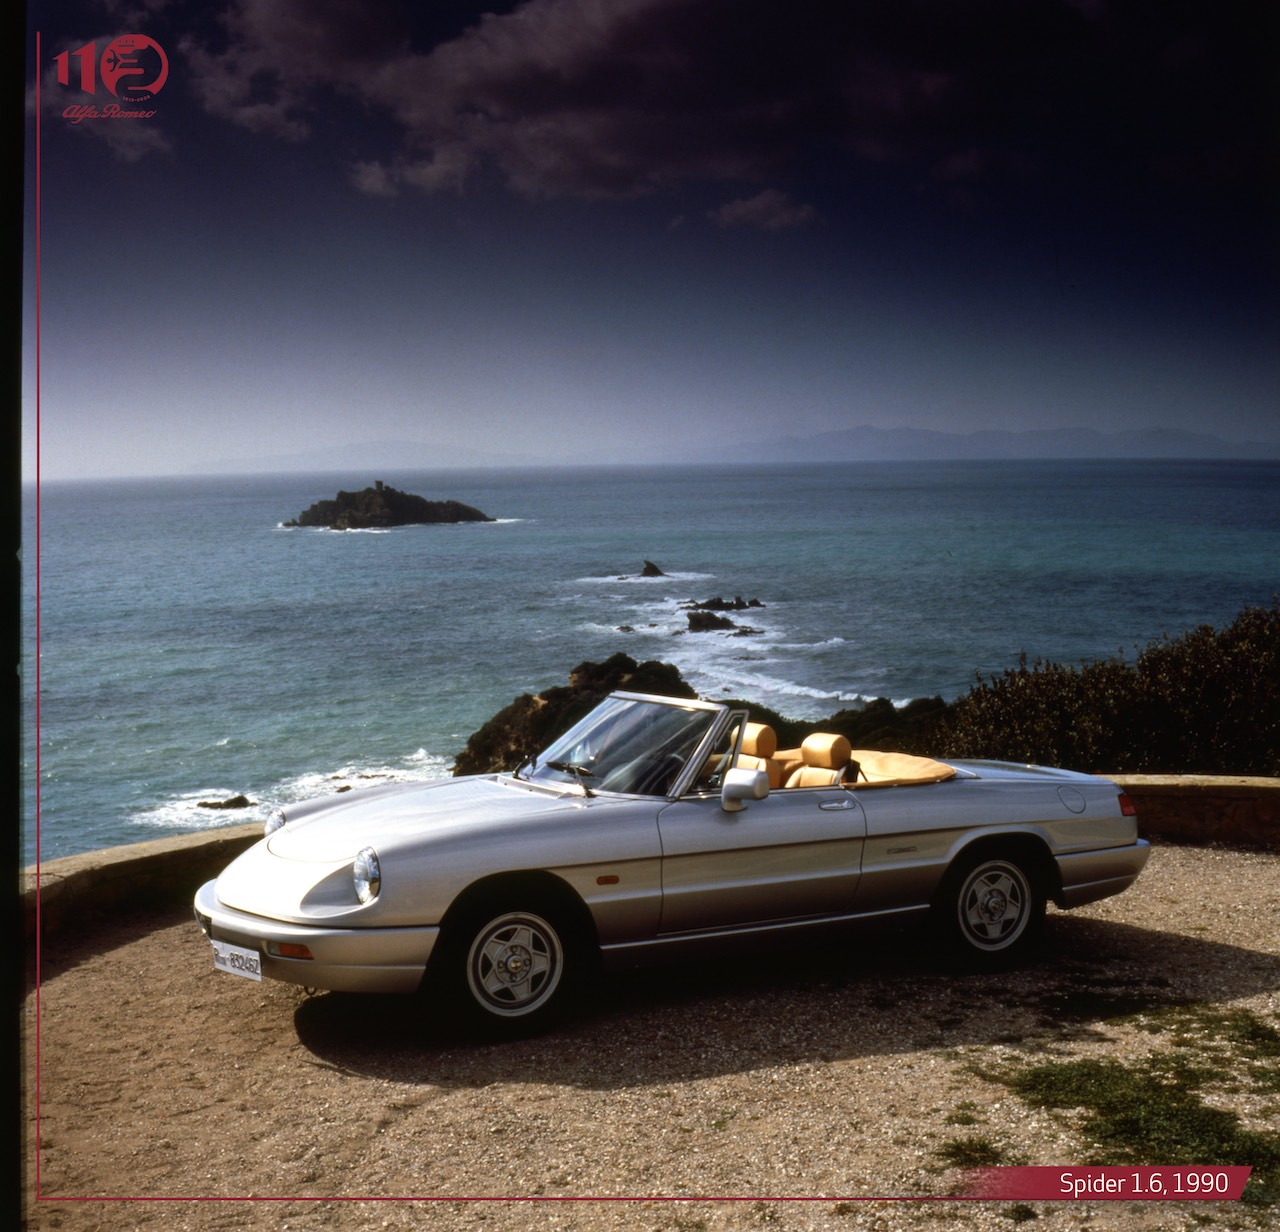 The Alfa Romeo Duetto Spider that conquered Hollywood